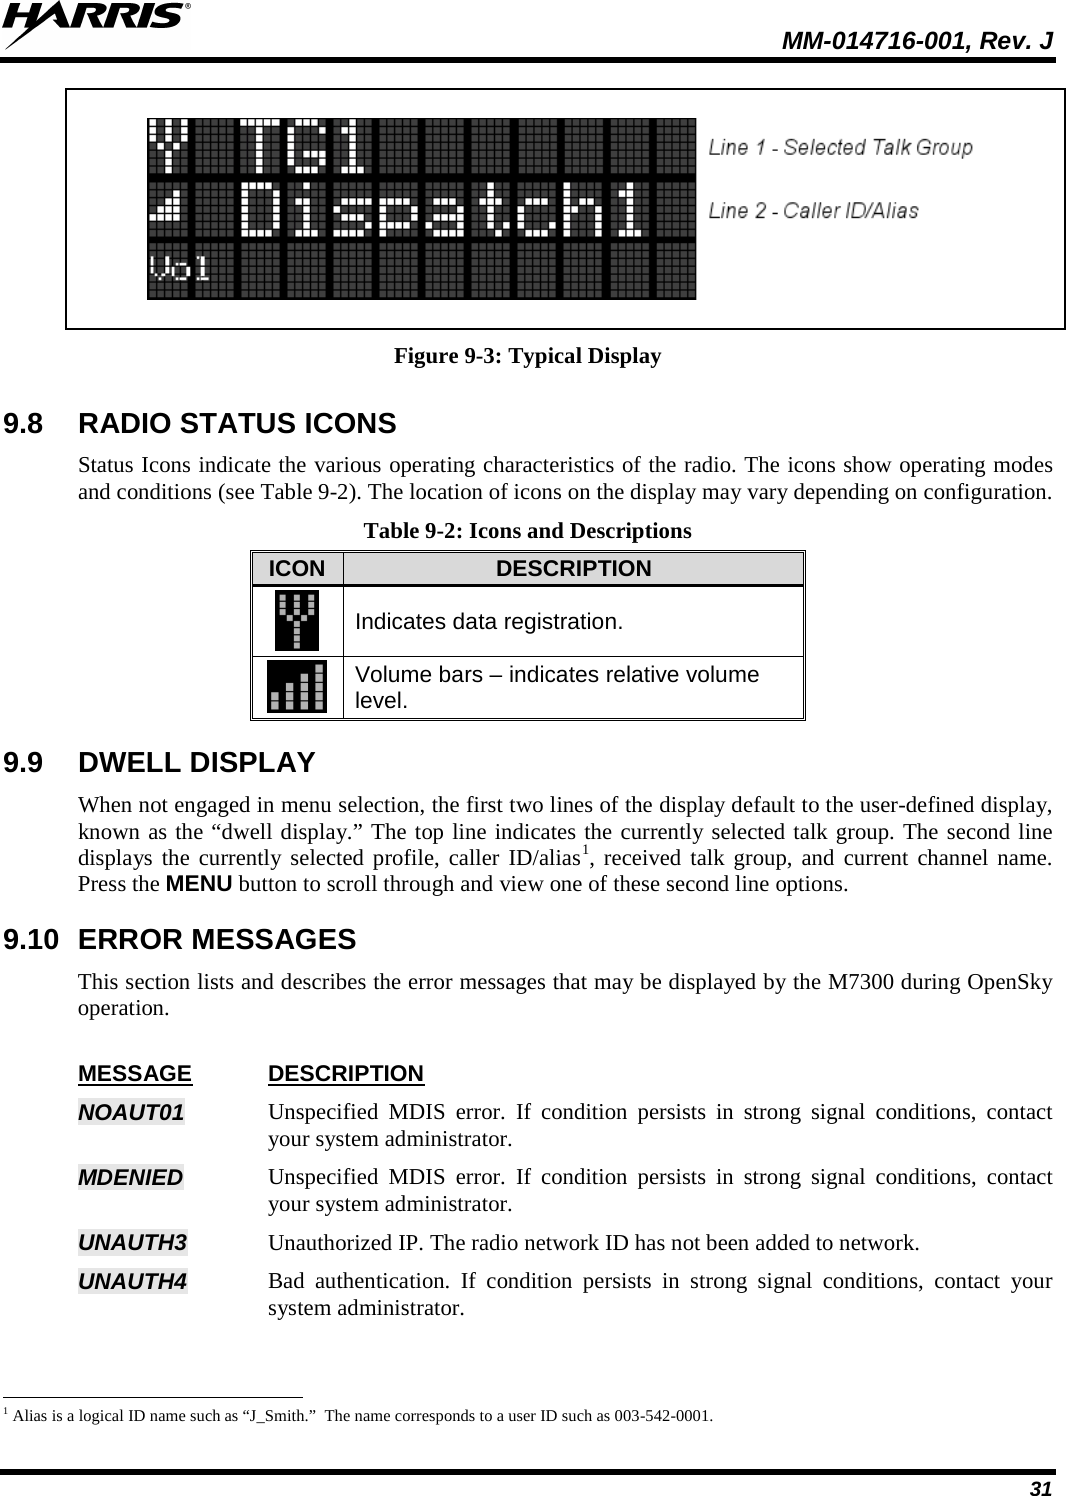  MM-014716-001, Rev. J 31    Figure 9-3: Typical Display 9.8 RADIO STATUS ICONS Status Icons indicate the various operating characteristics of the radio. The icons show operating modes and conditions (see Table 9-2). The location of icons on the display may vary depending on configuration. Table 9-2: Icons and Descriptions ICON DESCRIPTION  Indicates data registration.  Volume bars – indicates relative volume level. 9.9 DWELL DISPLAY When not engaged in menu selection, the first two lines of the display default to the user-defined display, known as the “dwell display.” The top line indicates the currently selected talk group. The second line displays the currently selected profile, caller ID/alias19.10 ERROR MESSAGES , received talk group, and current channel name. Press the MENU button to scroll through and view one of these second line options.  This section lists and describes the error messages that may be displayed by the M7300 during OpenSky operation.  MESSAGE DESCRIPTION NOAUT01 Unspecified MDIS error. If condition persists in strong signal conditions, contact your system administrator. MDENIED  Unspecified MDIS error. If condition persists in strong signal conditions, contact your system administrator. UNAUTH3 Unauthorized IP. The radio network ID has not been added to network. UNAUTH4 Bad authentication. If condition persists in strong signal conditions, contact your system administrator.                                                            1 Alias is a logical ID name such as “J_Smith.”  The name corresponds to a user ID such as 003-542-0001. 